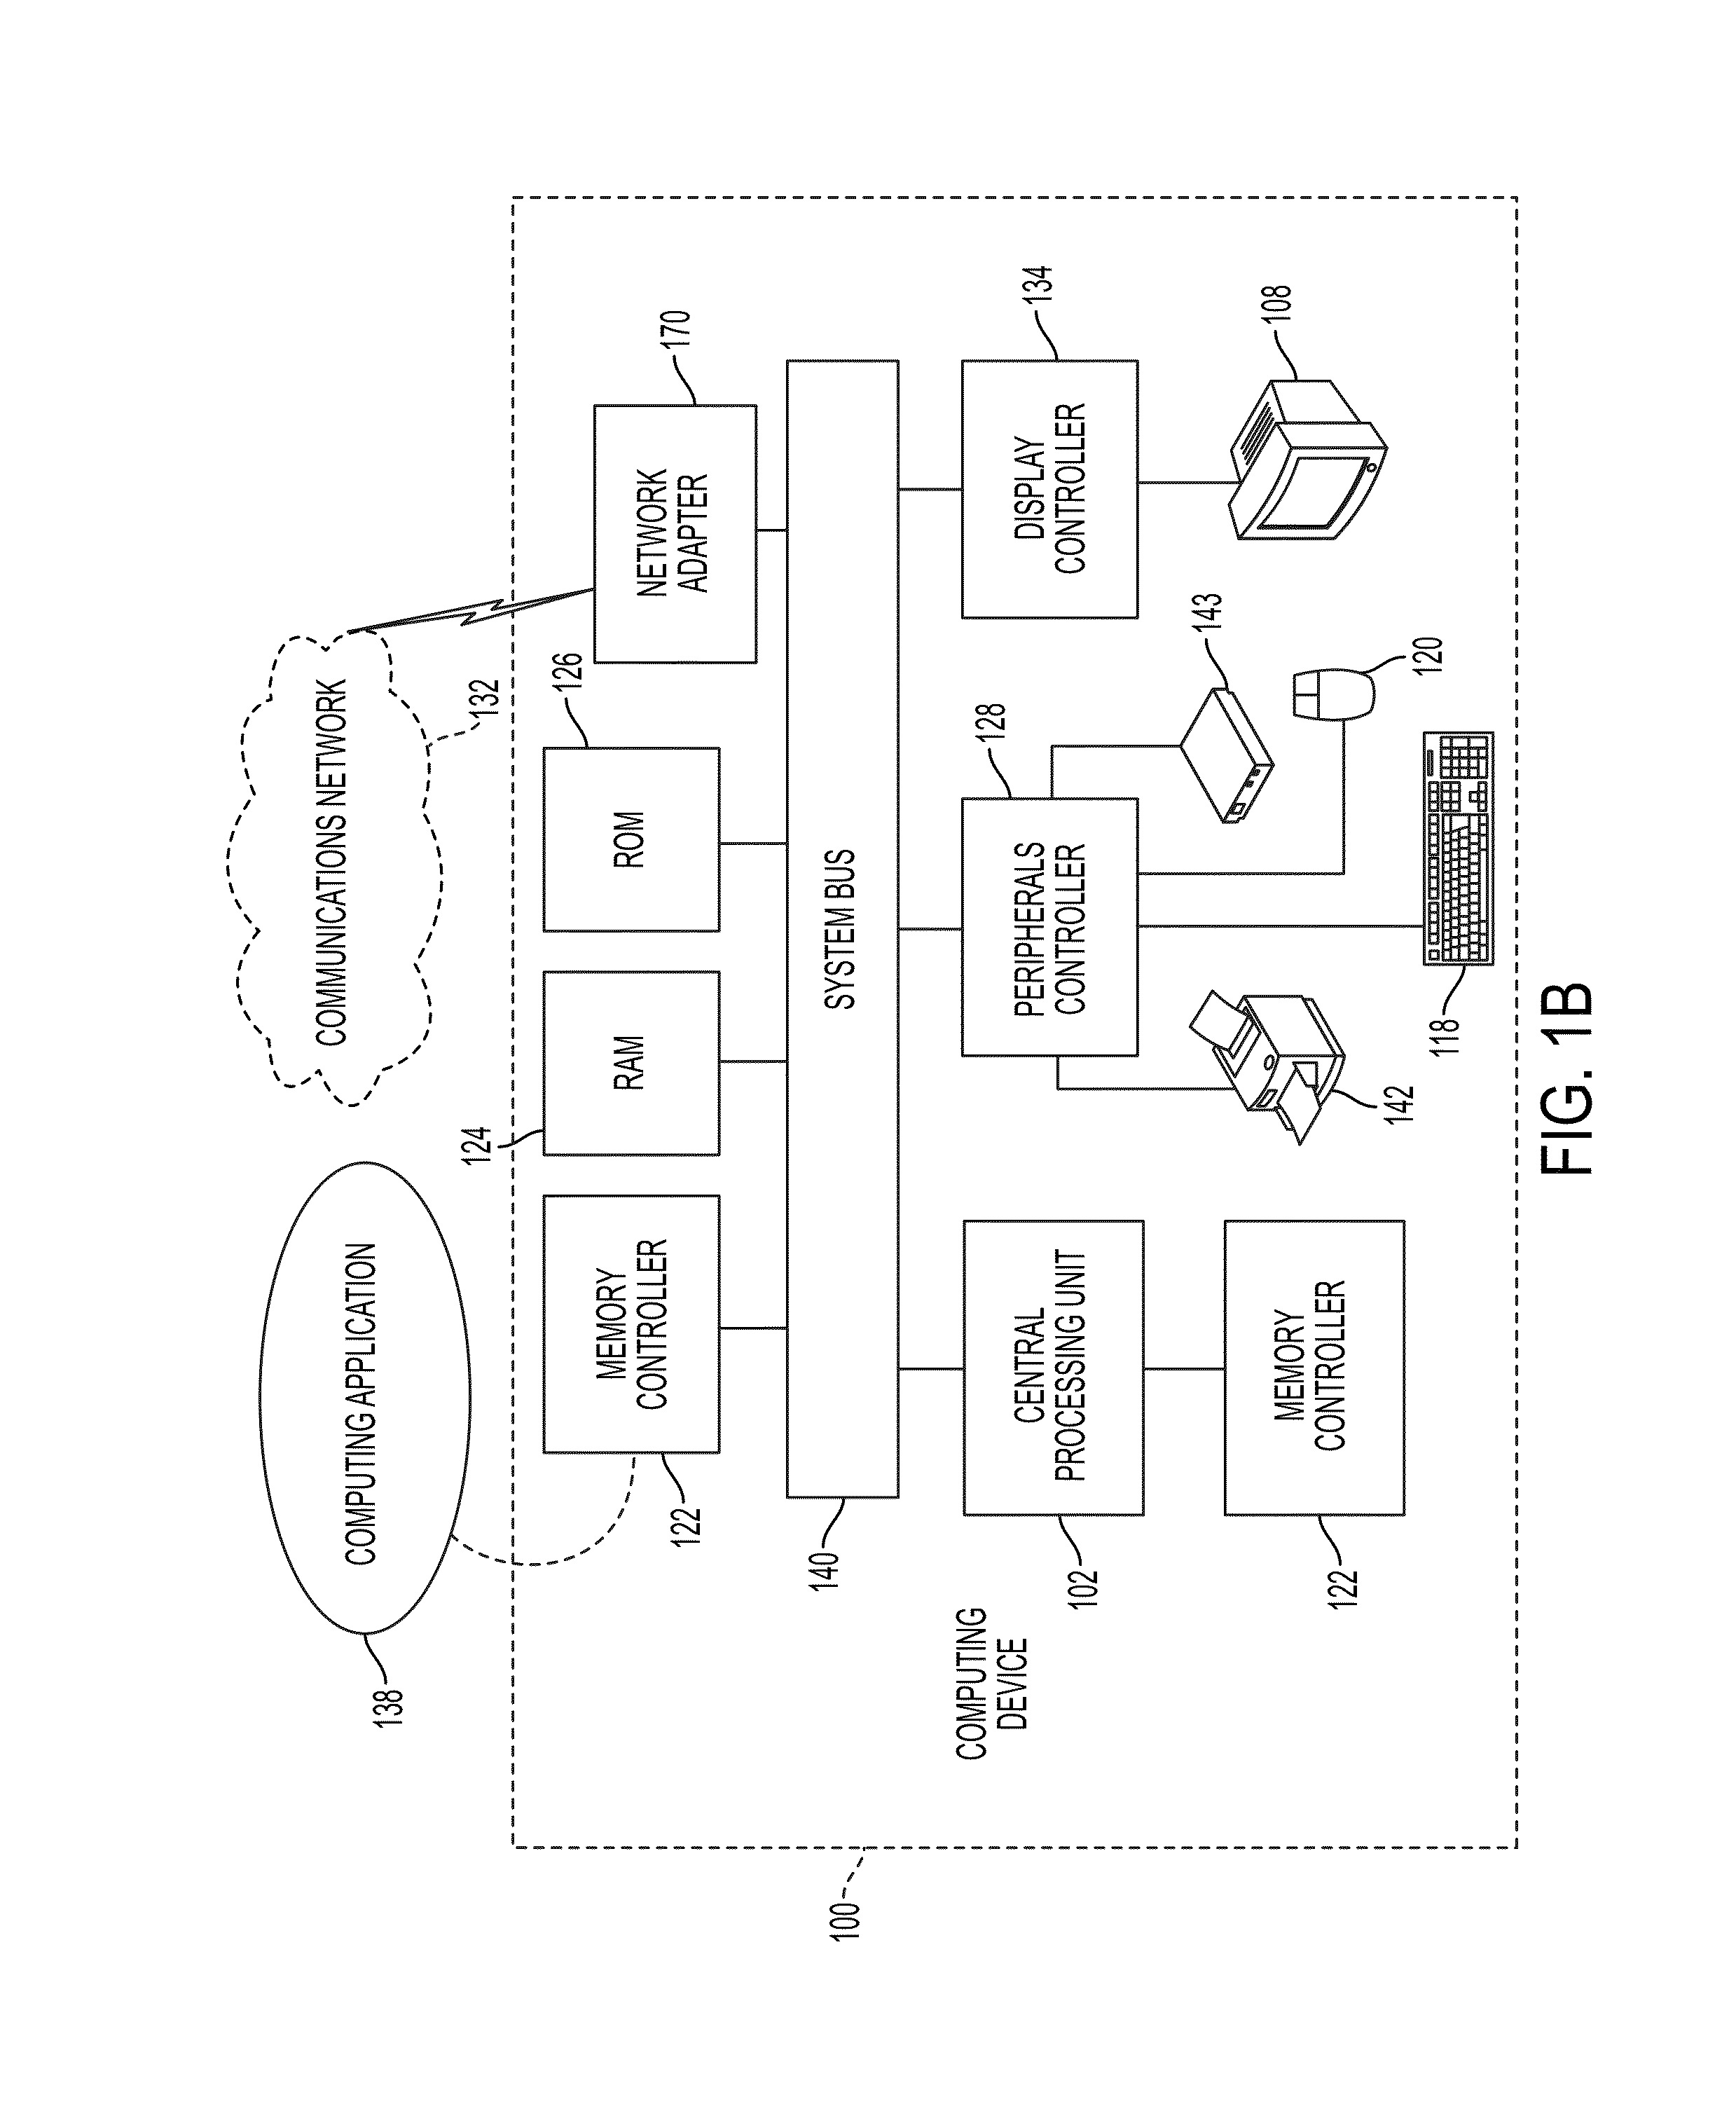 Methods and systems for measuring human interaction